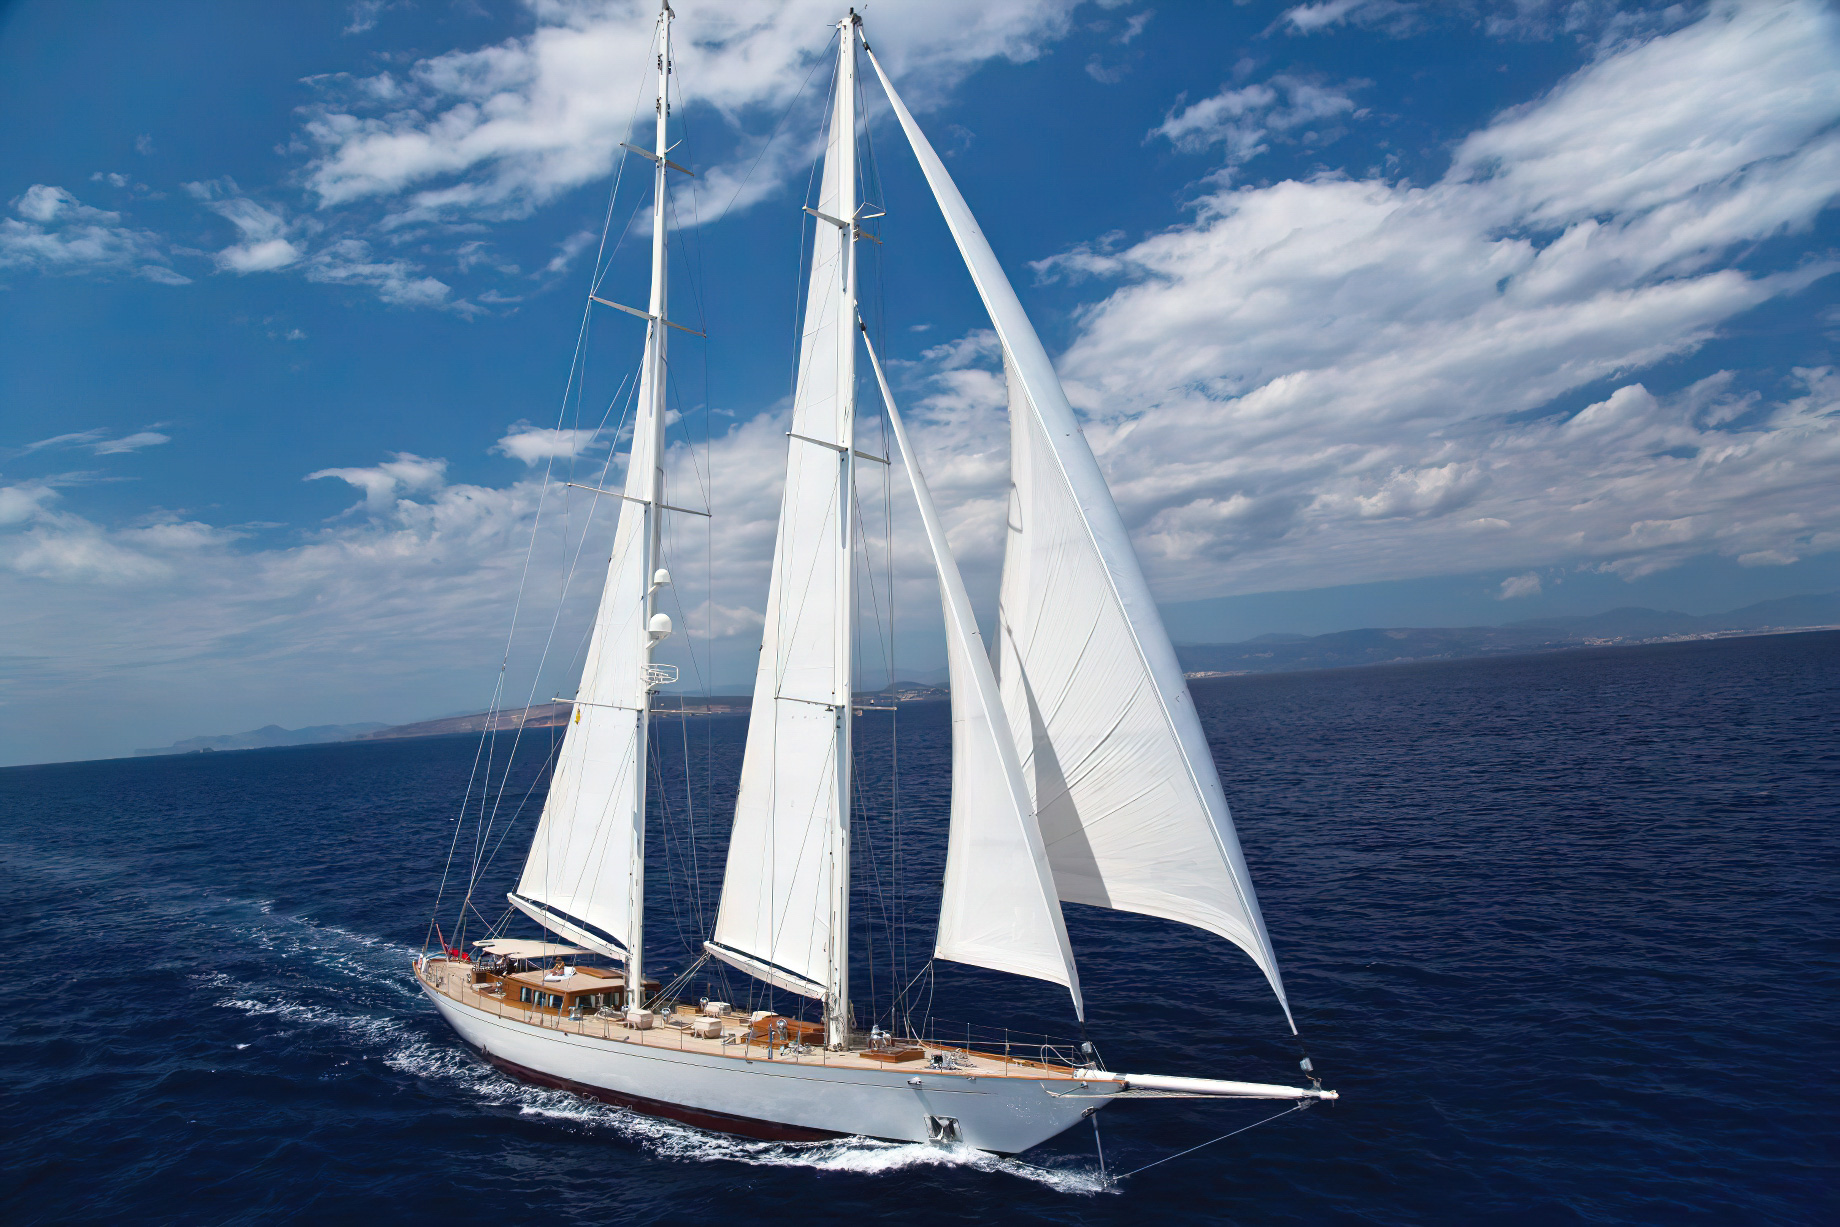 Discover Six of the Best Luxury Yachts for Sale - SY GWEILO - Sails